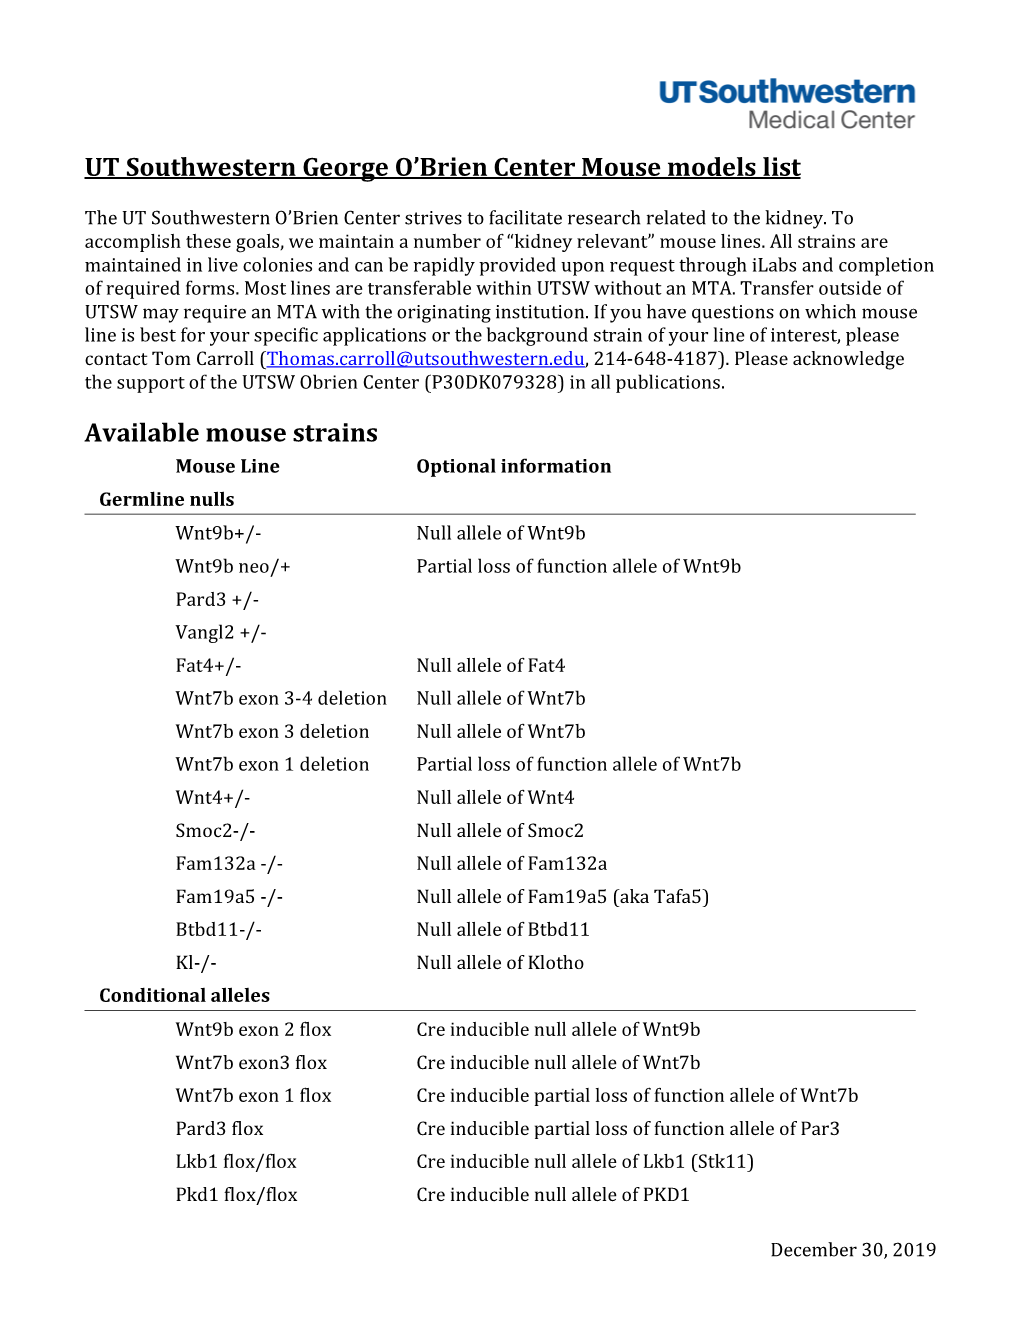 UT Southwestern George O'brien Center Mouse Models List Available